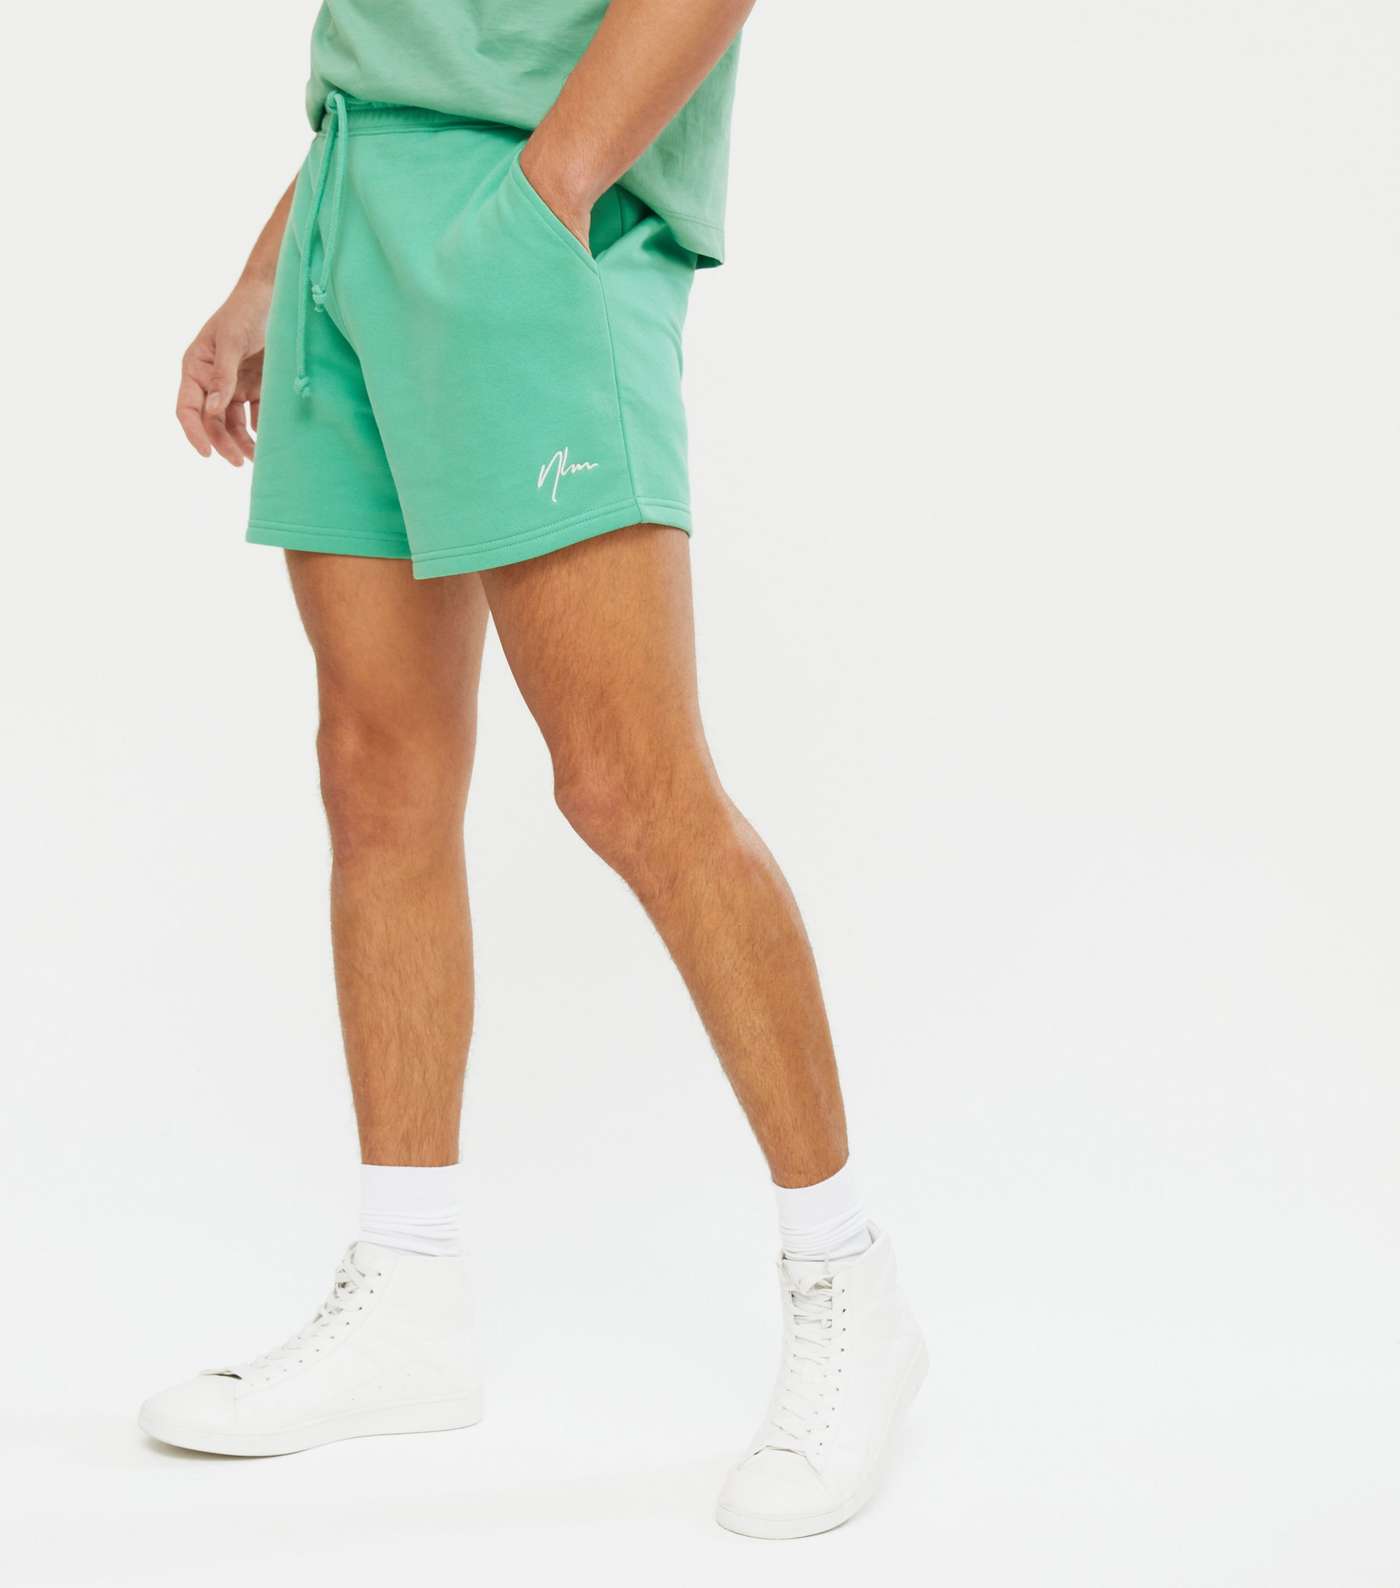 Green NLM Embroidered Short Length Shorts Image 2